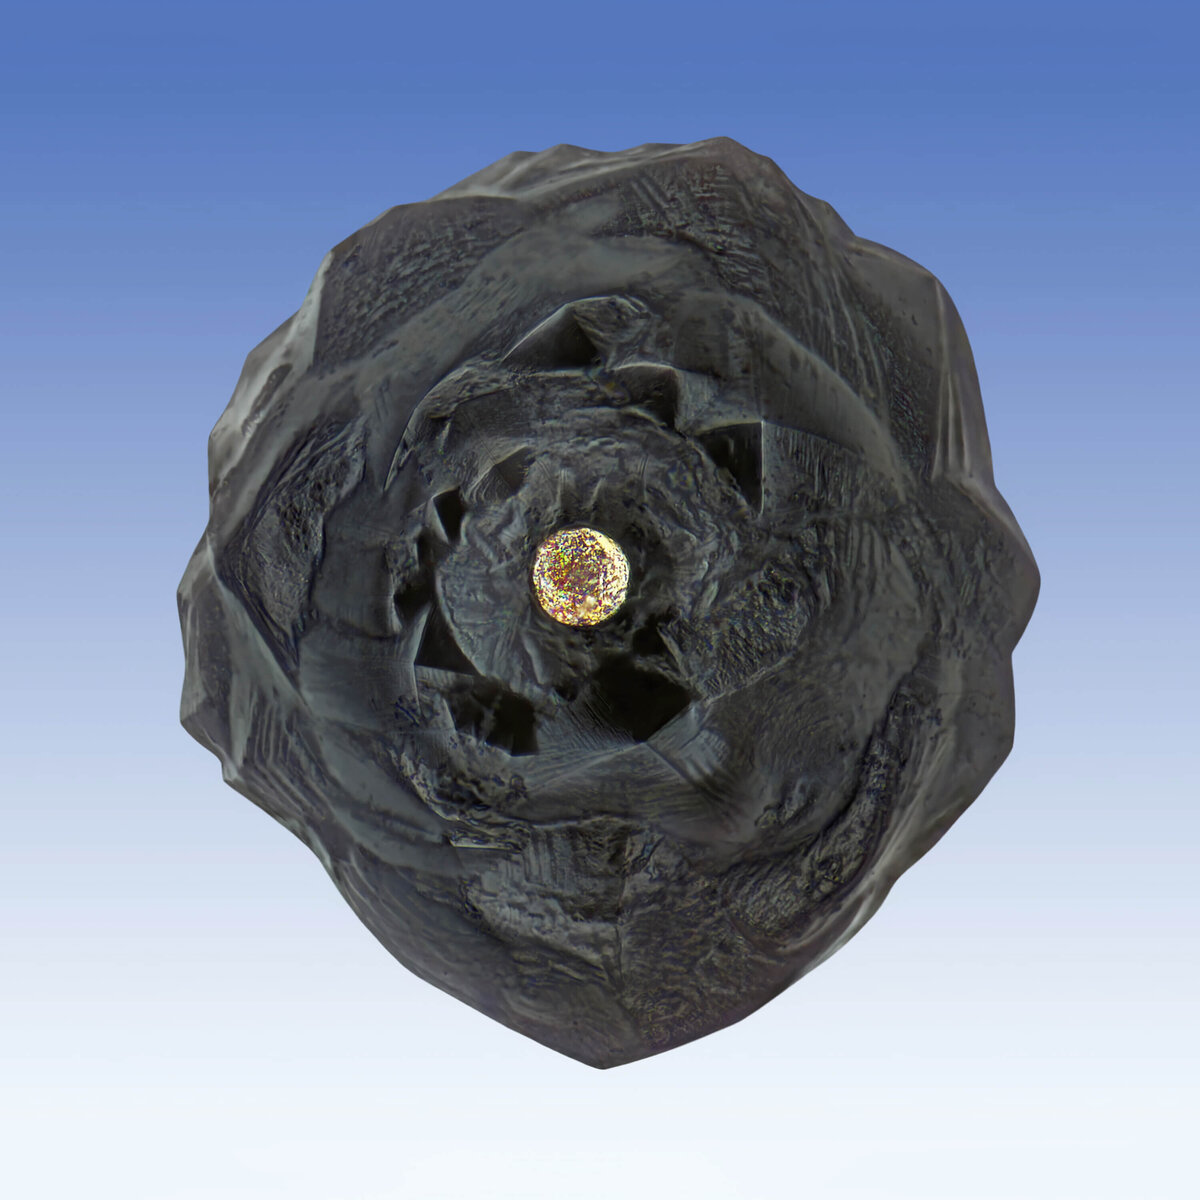 NMM 244 Project Stardust micrometeorite discovered and photography by Jon Larsen and Jan Braly Kihle